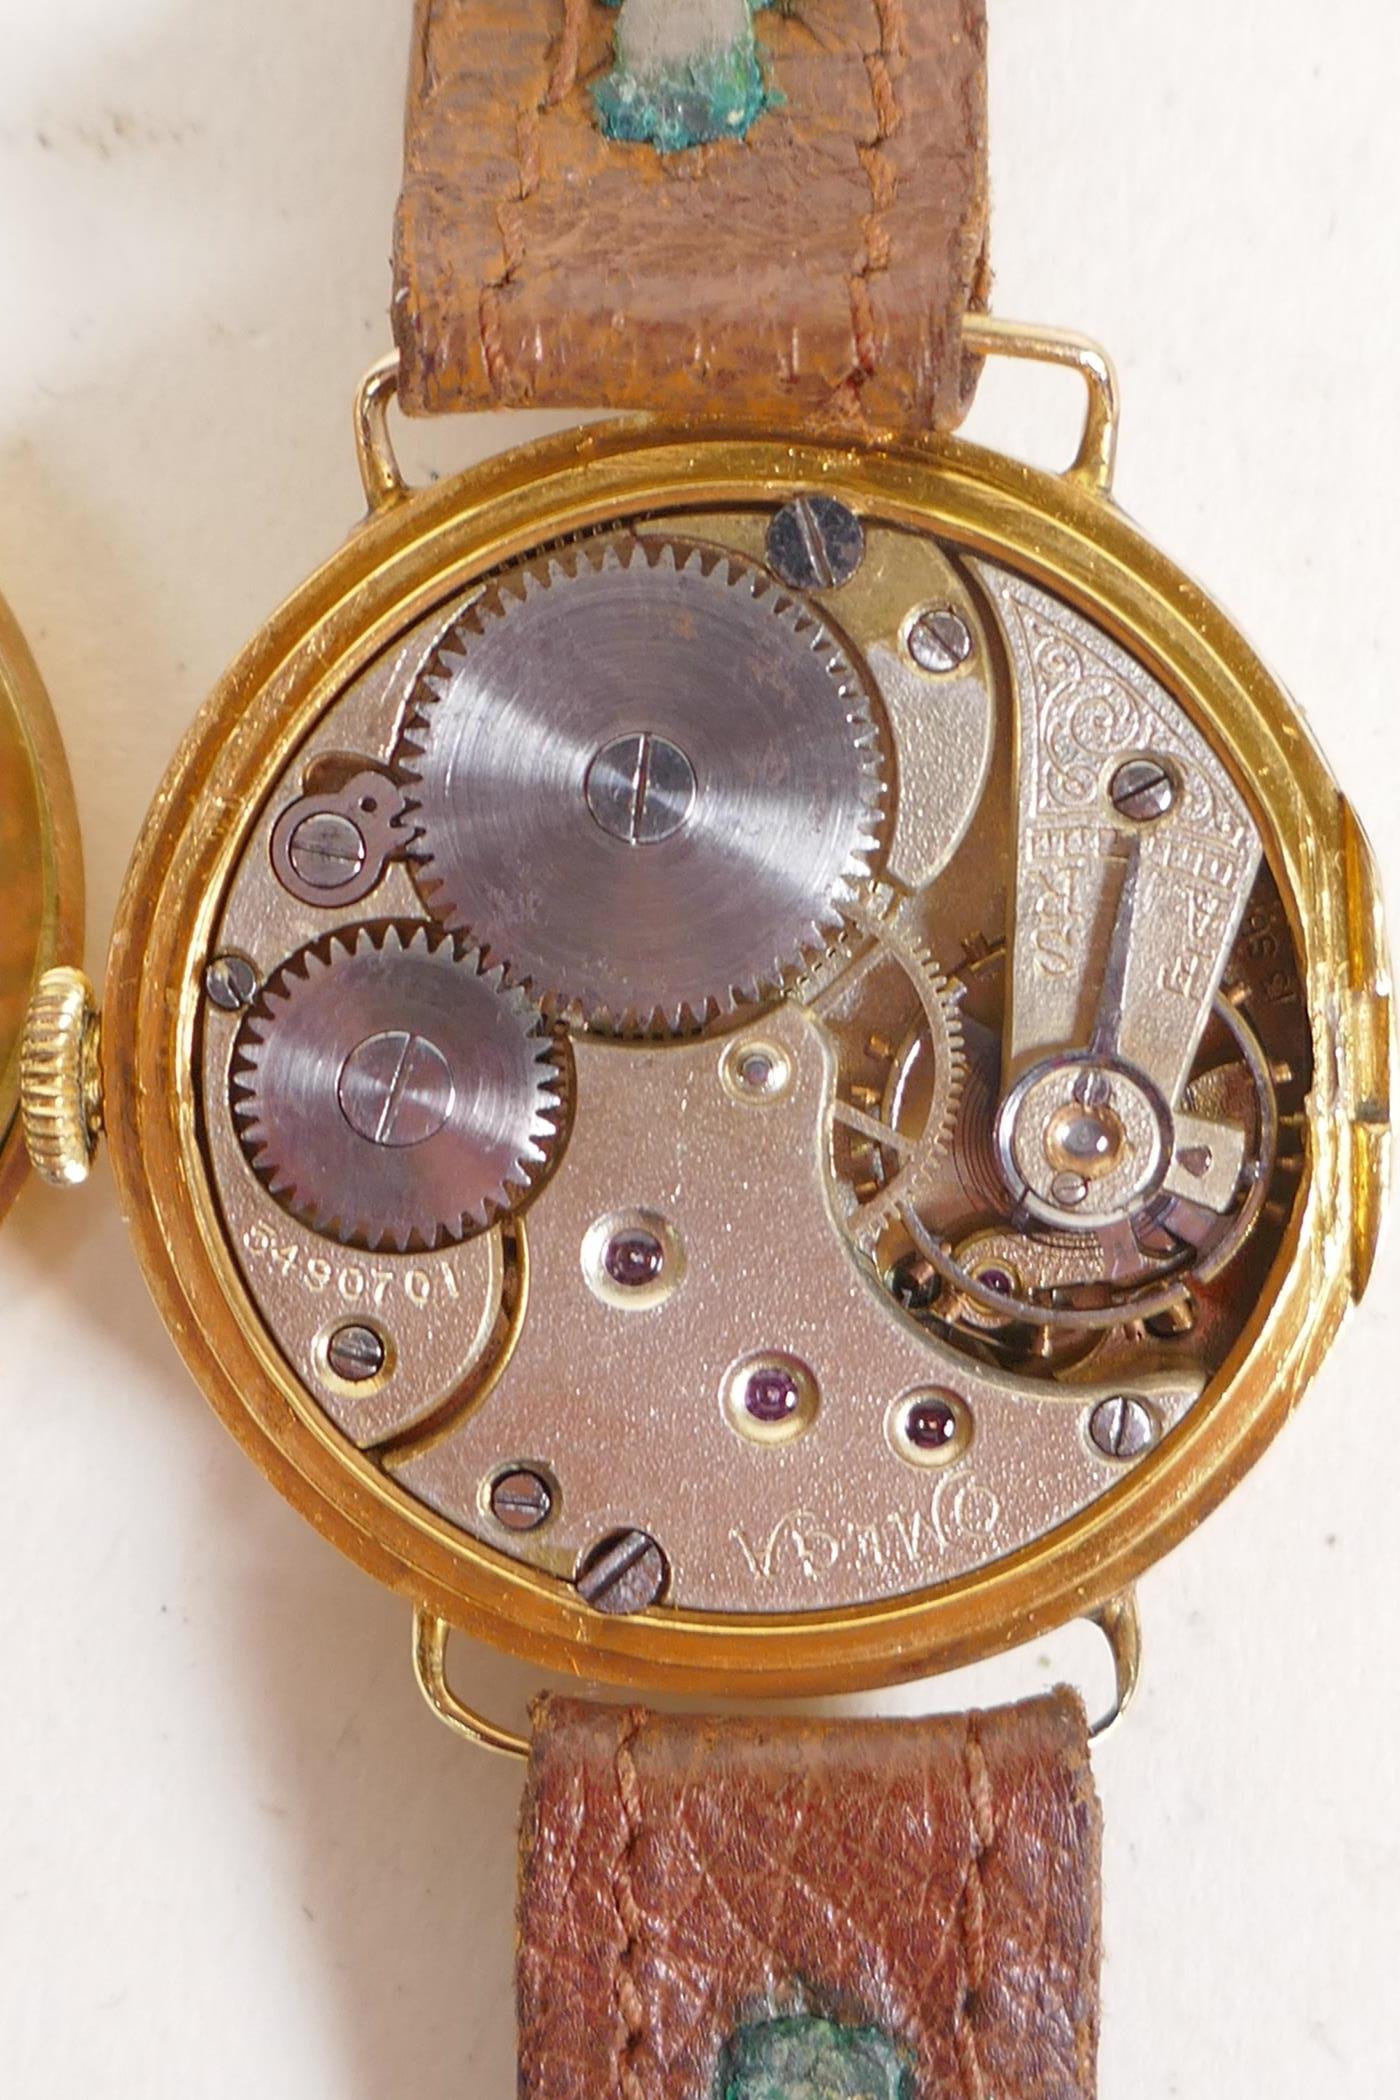 An Omega wrist watch in 18ct gold case, AF - Image 2 of 4